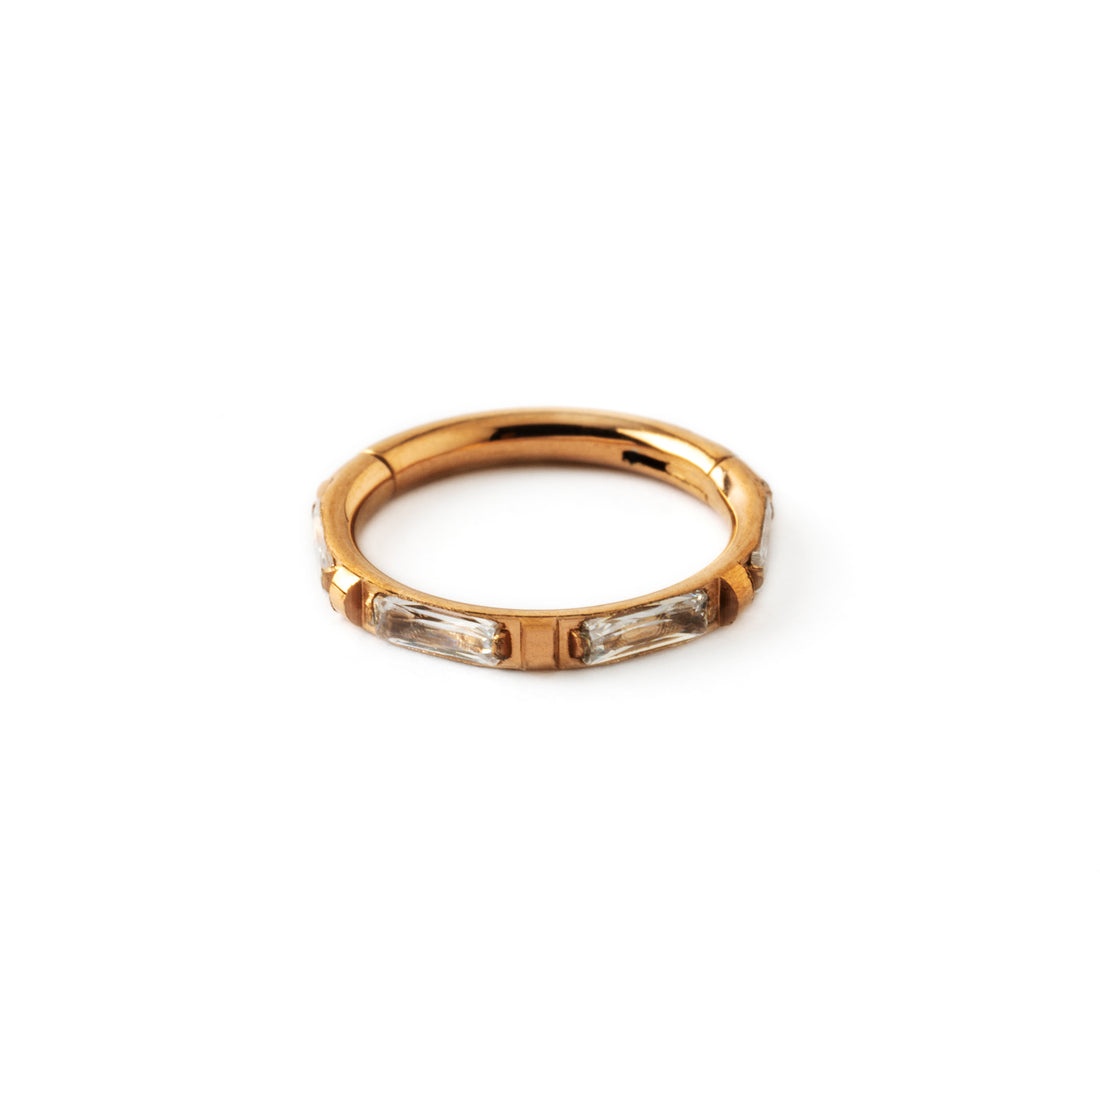 Rose Gold clicker ring with clear crystals inlay frontal view